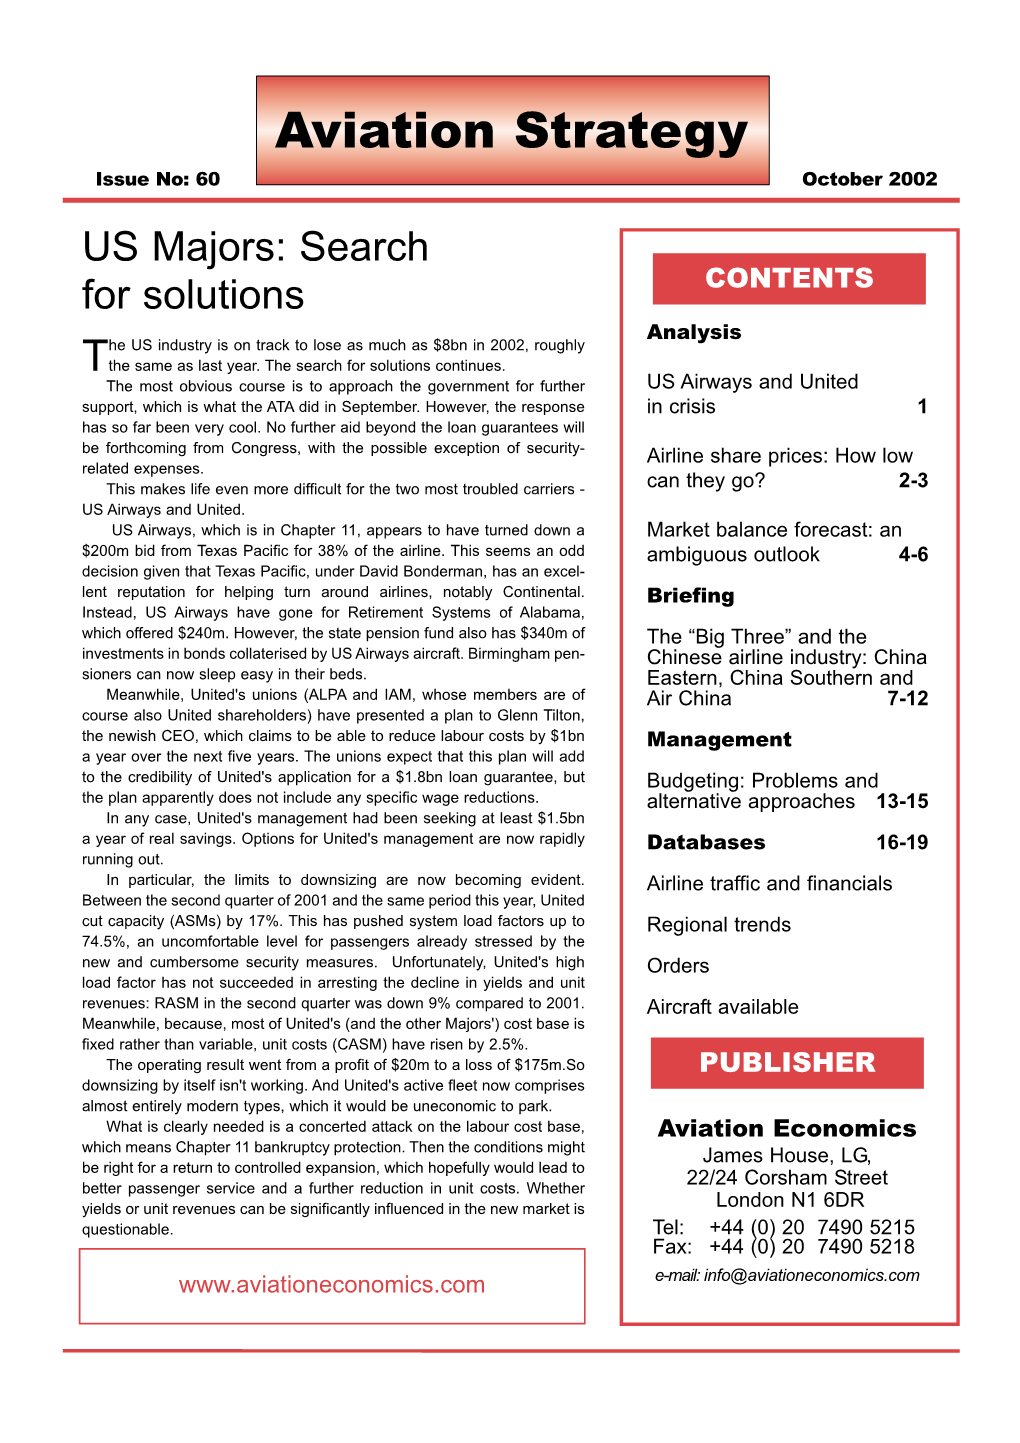 October 2002 US Majors: Search for Solutions CONTENTS Analysis He US Industry Is on Track to Lose As Much As $8Bn in 2002, Roughly Tthe Same As Last Year